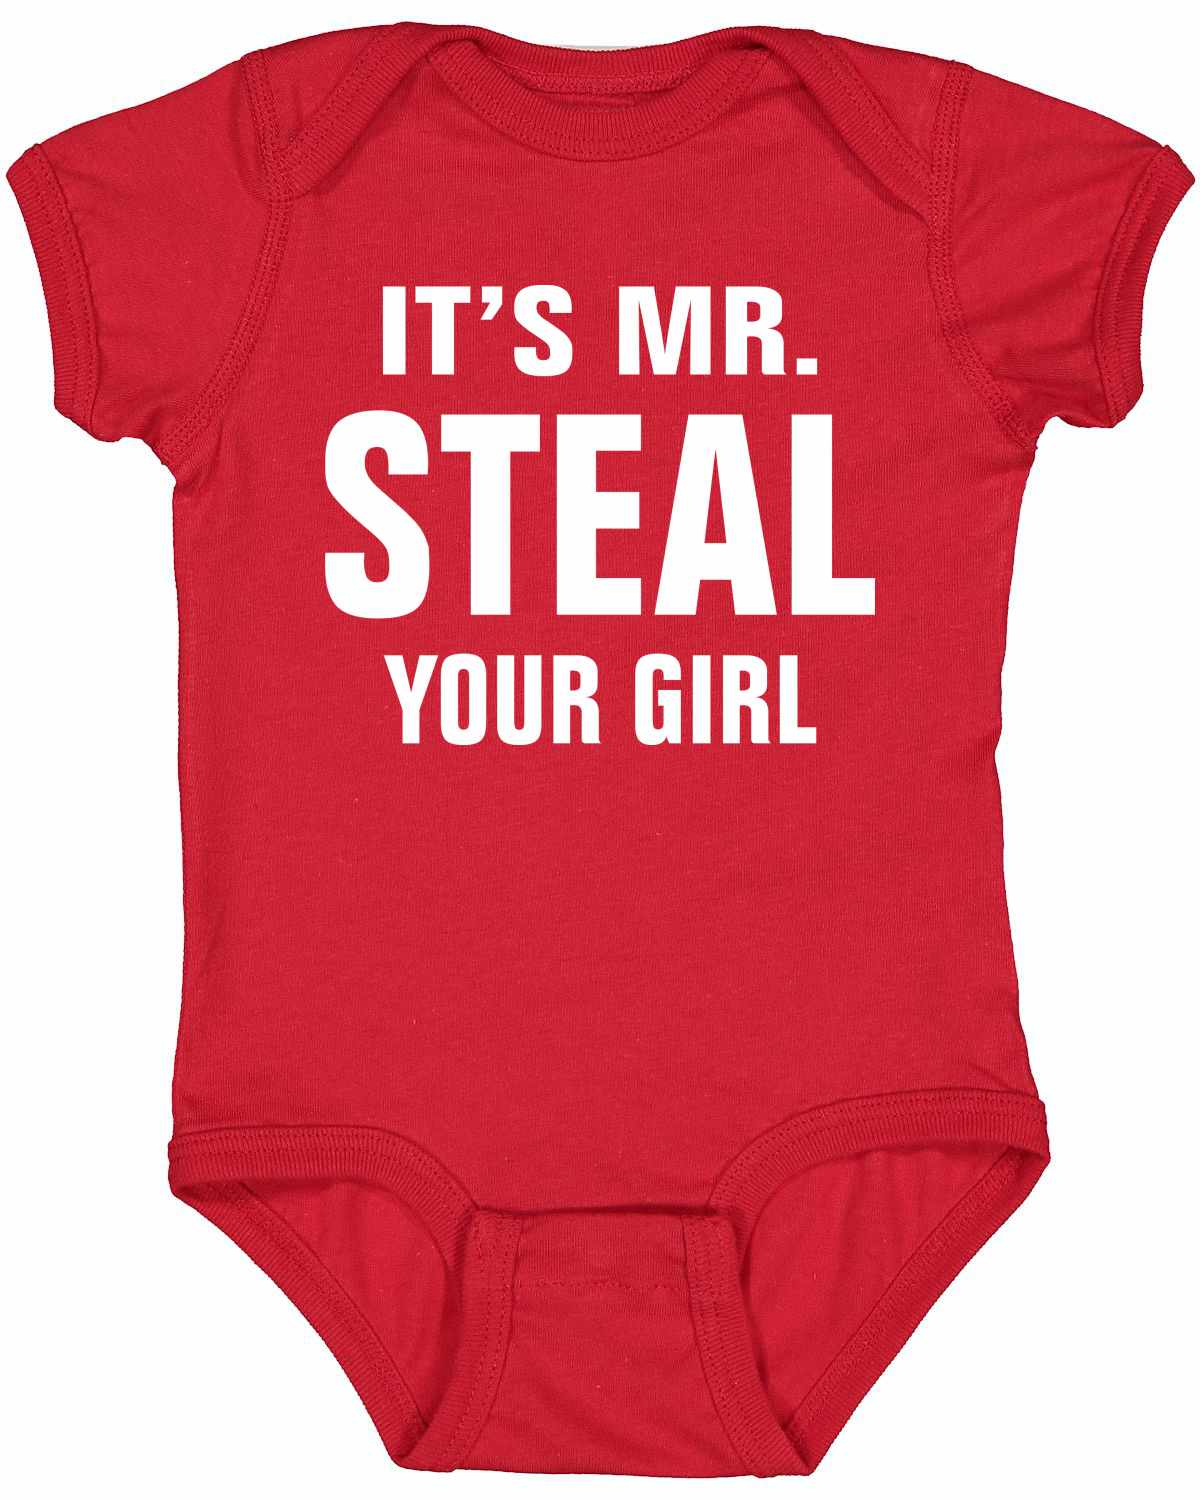 IT'S MR. STEAL YOUR GIRL on Infant BodySuit